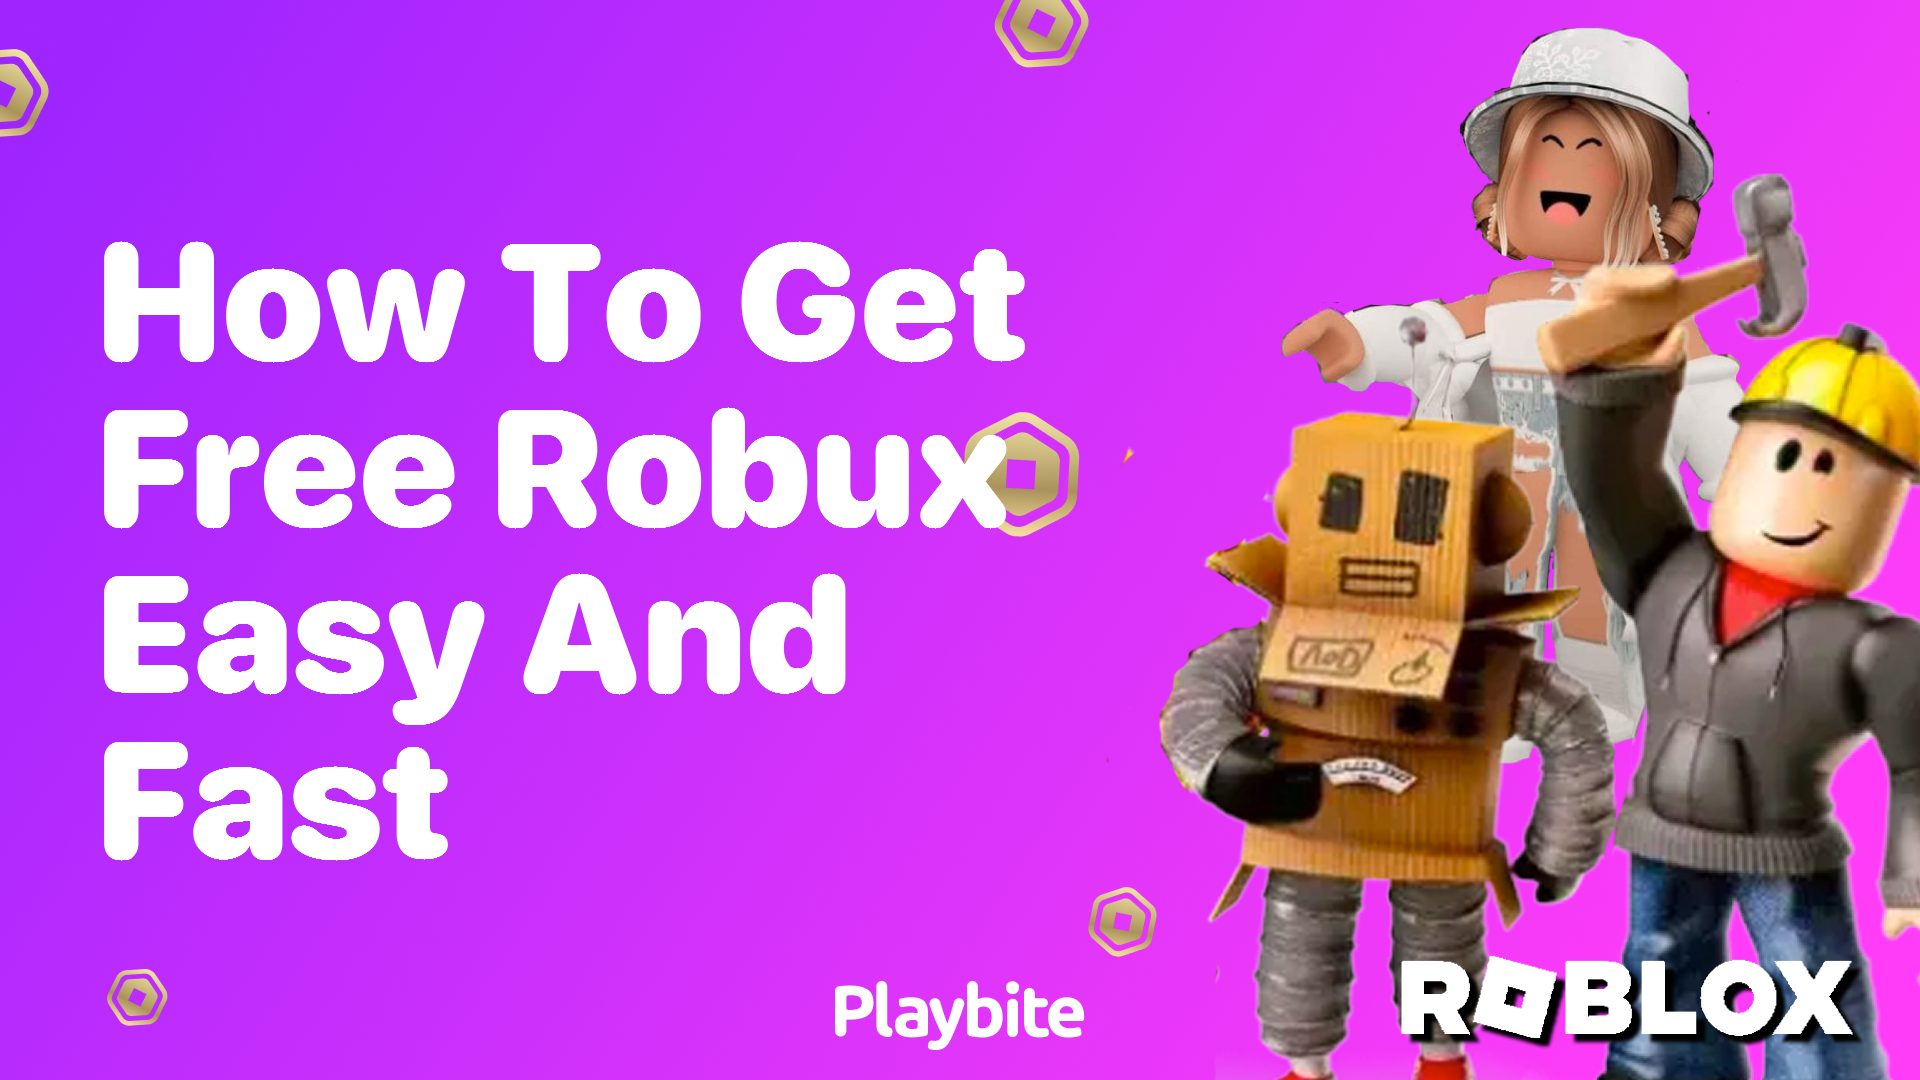 How to Get Free Robux Easy and Fast - Playbite